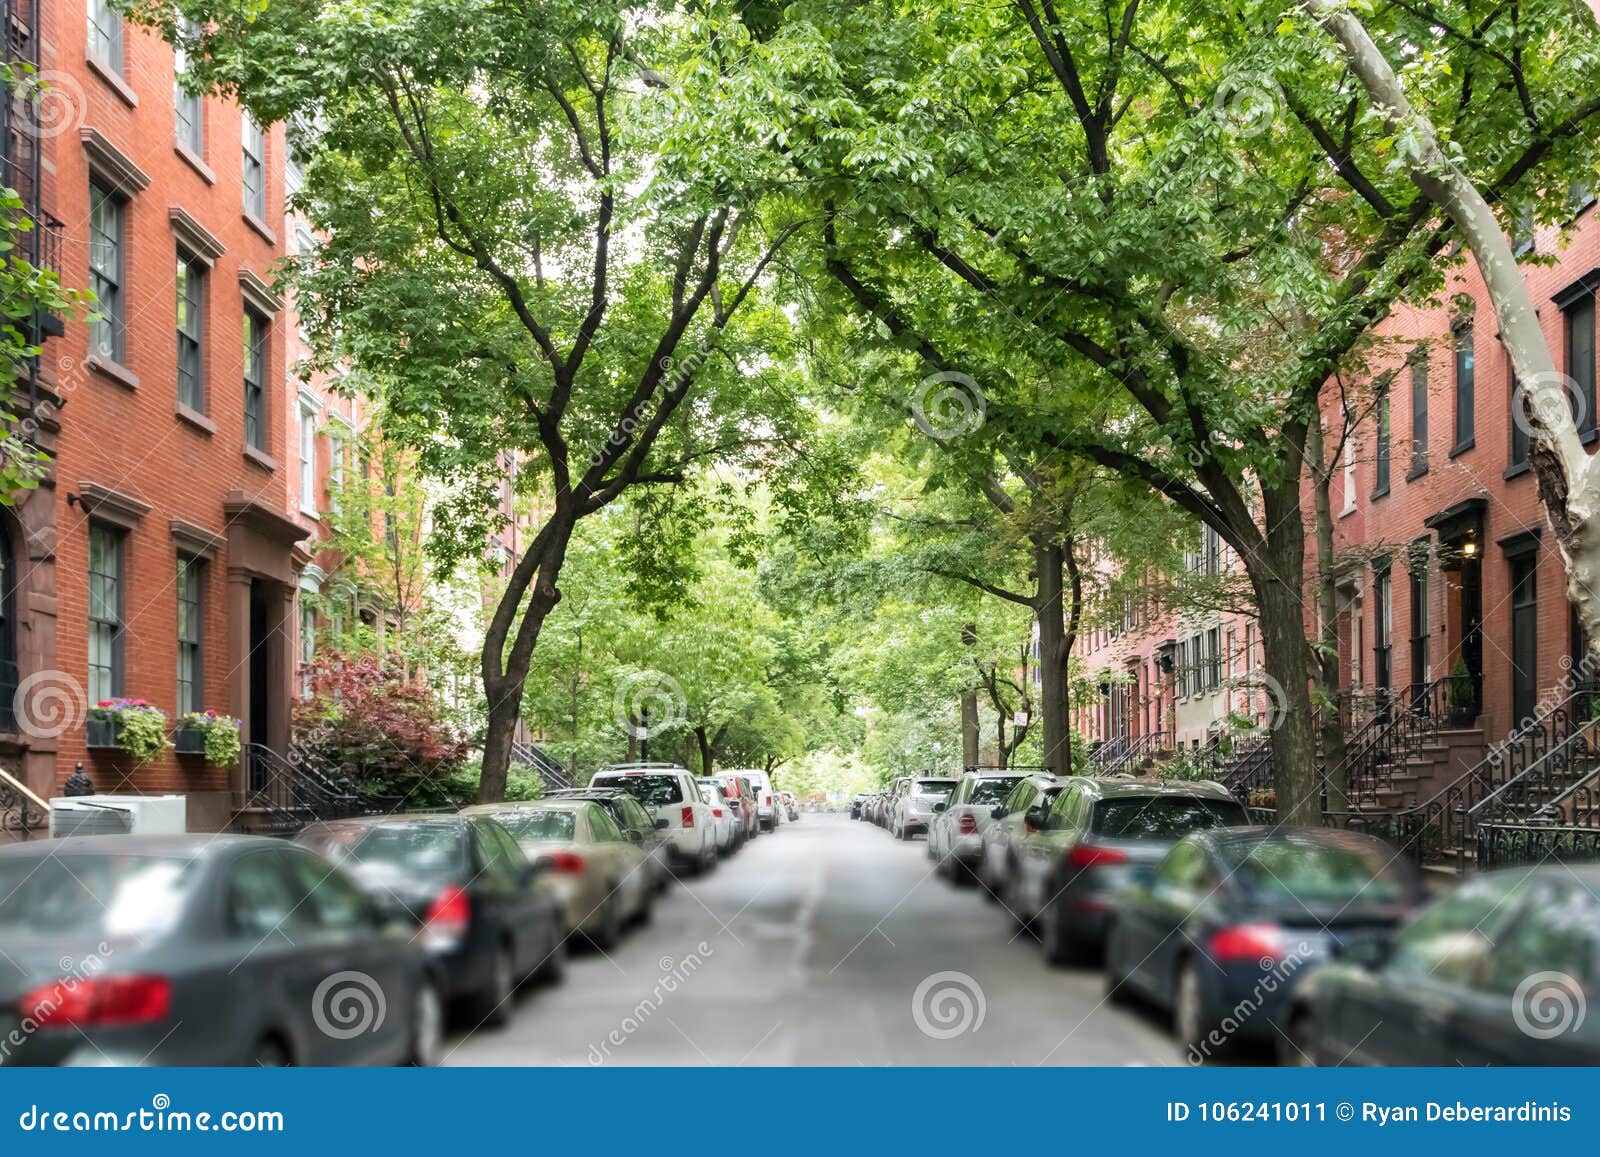 tree lined street of historic brownstone buildings in a greenwich village neighborhood in manhattan new york city nyc